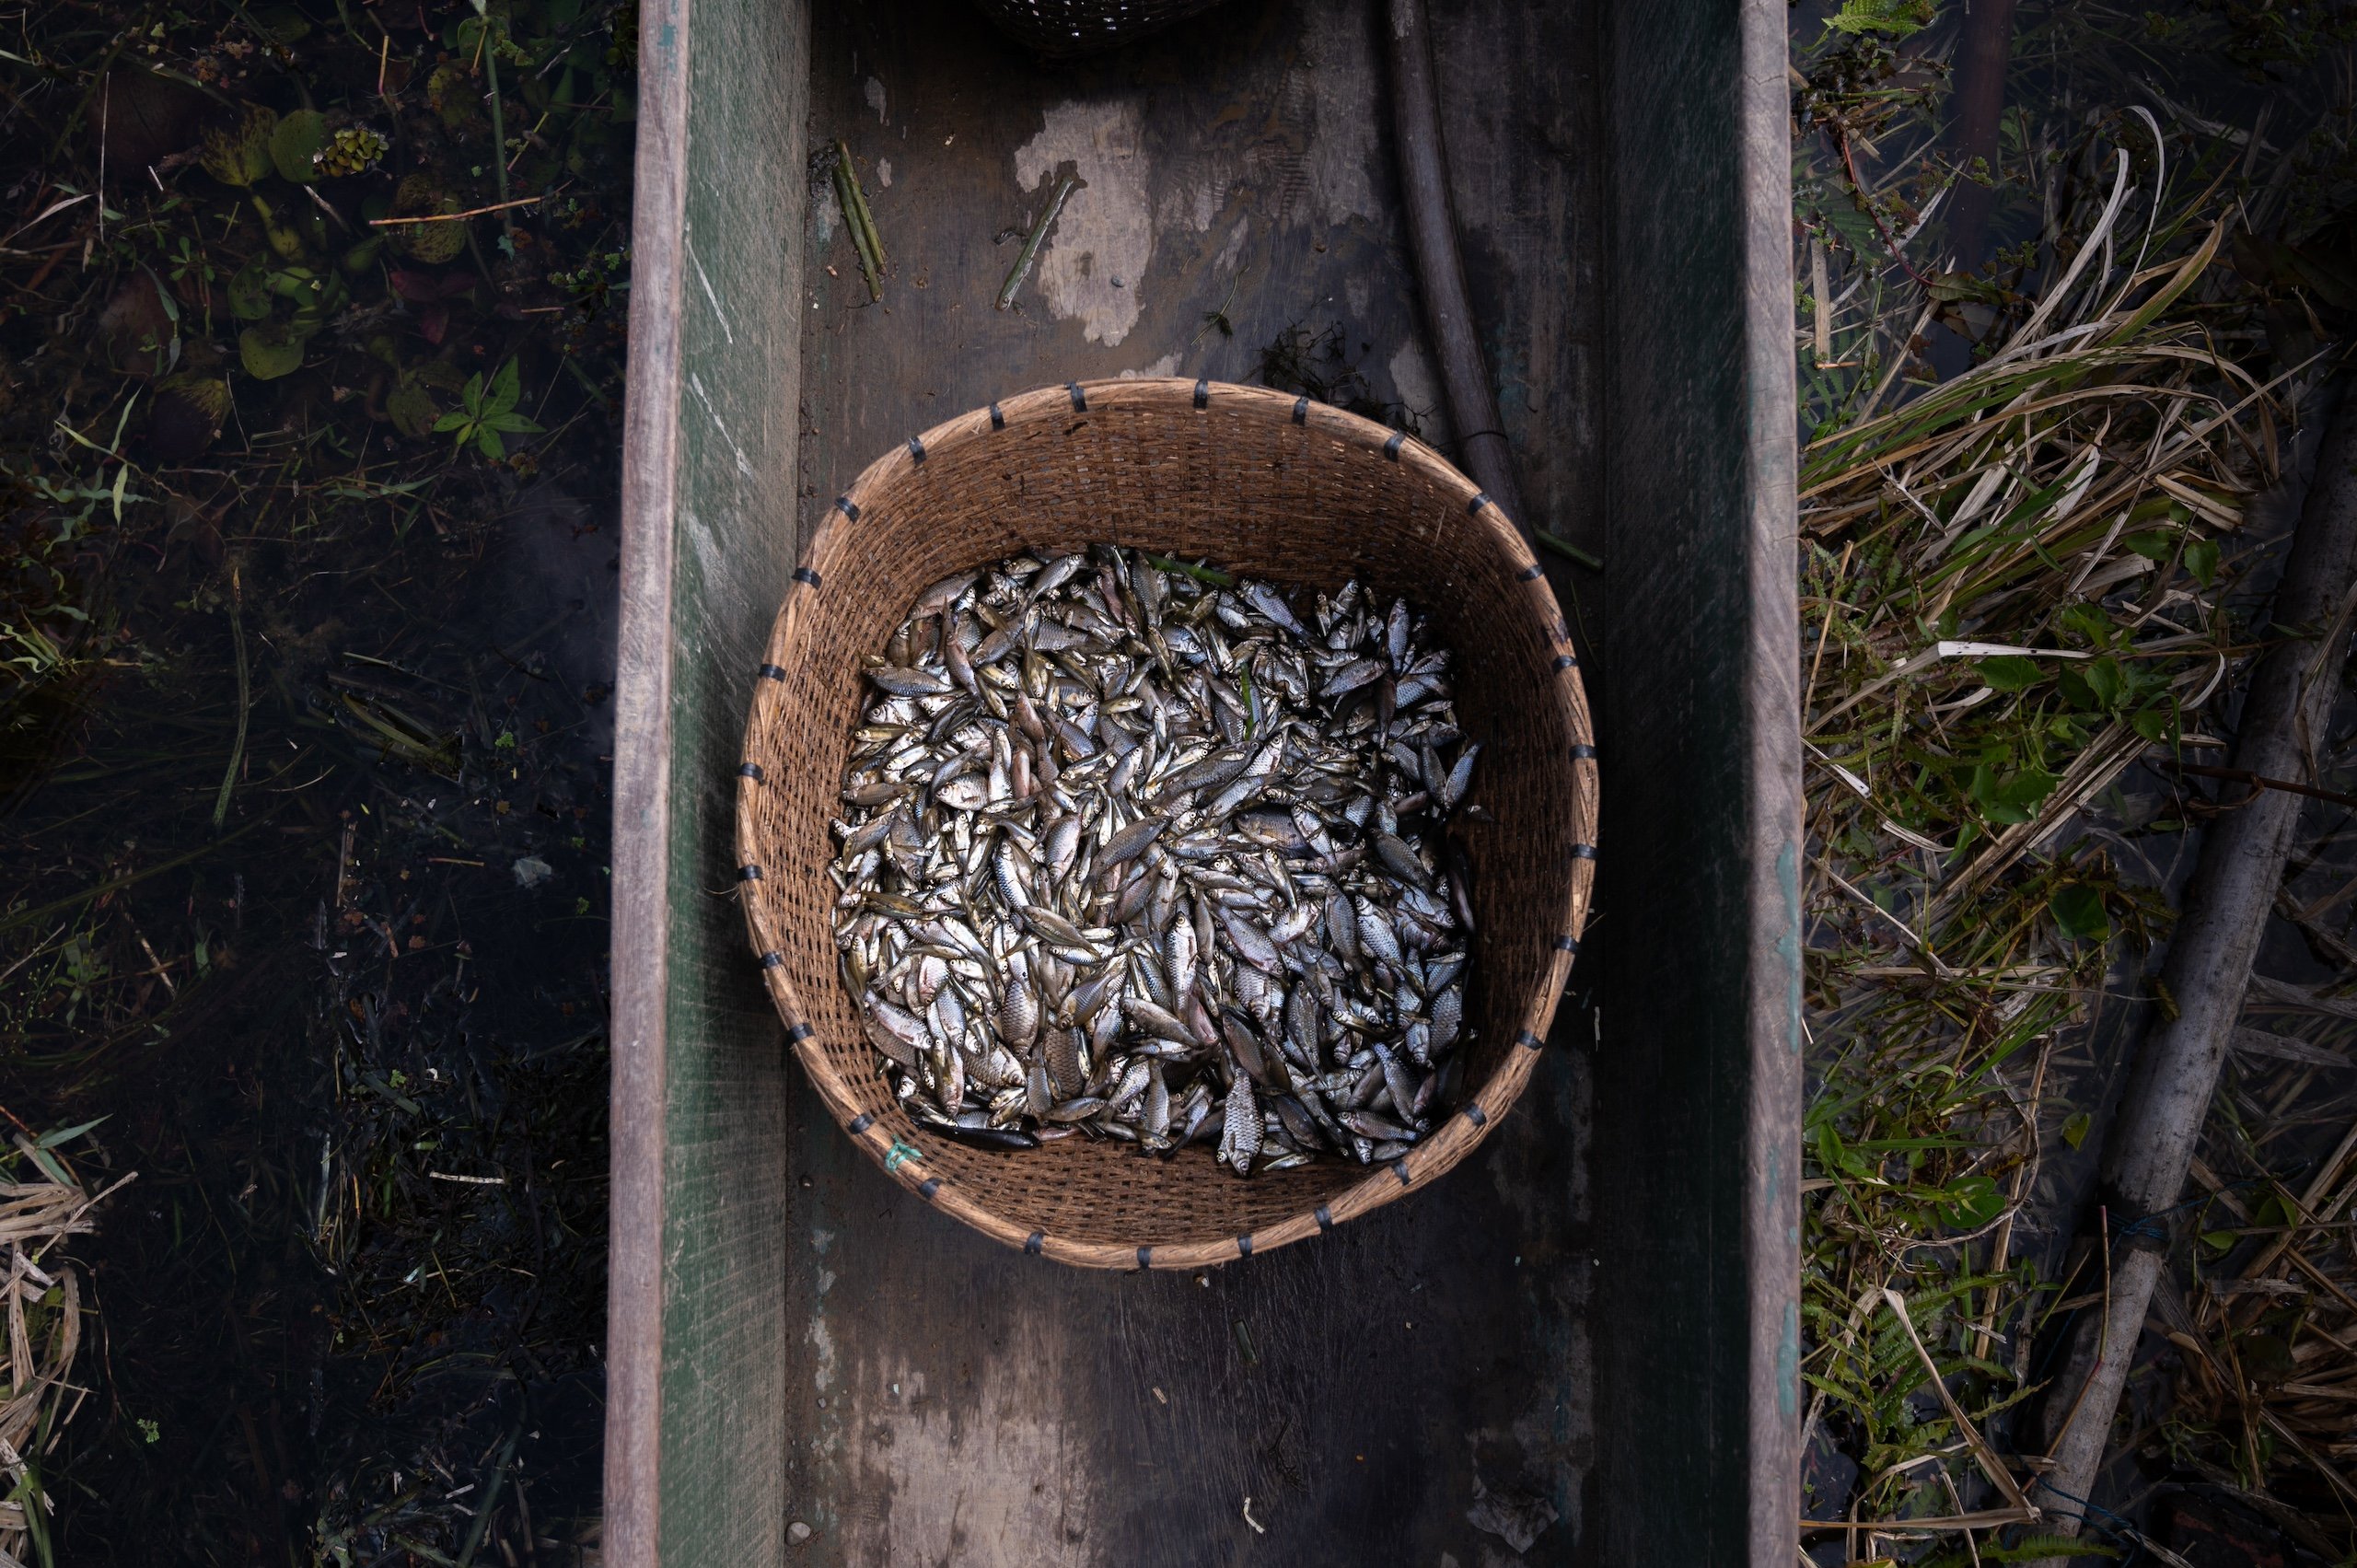 A basket of small fish viewed from above